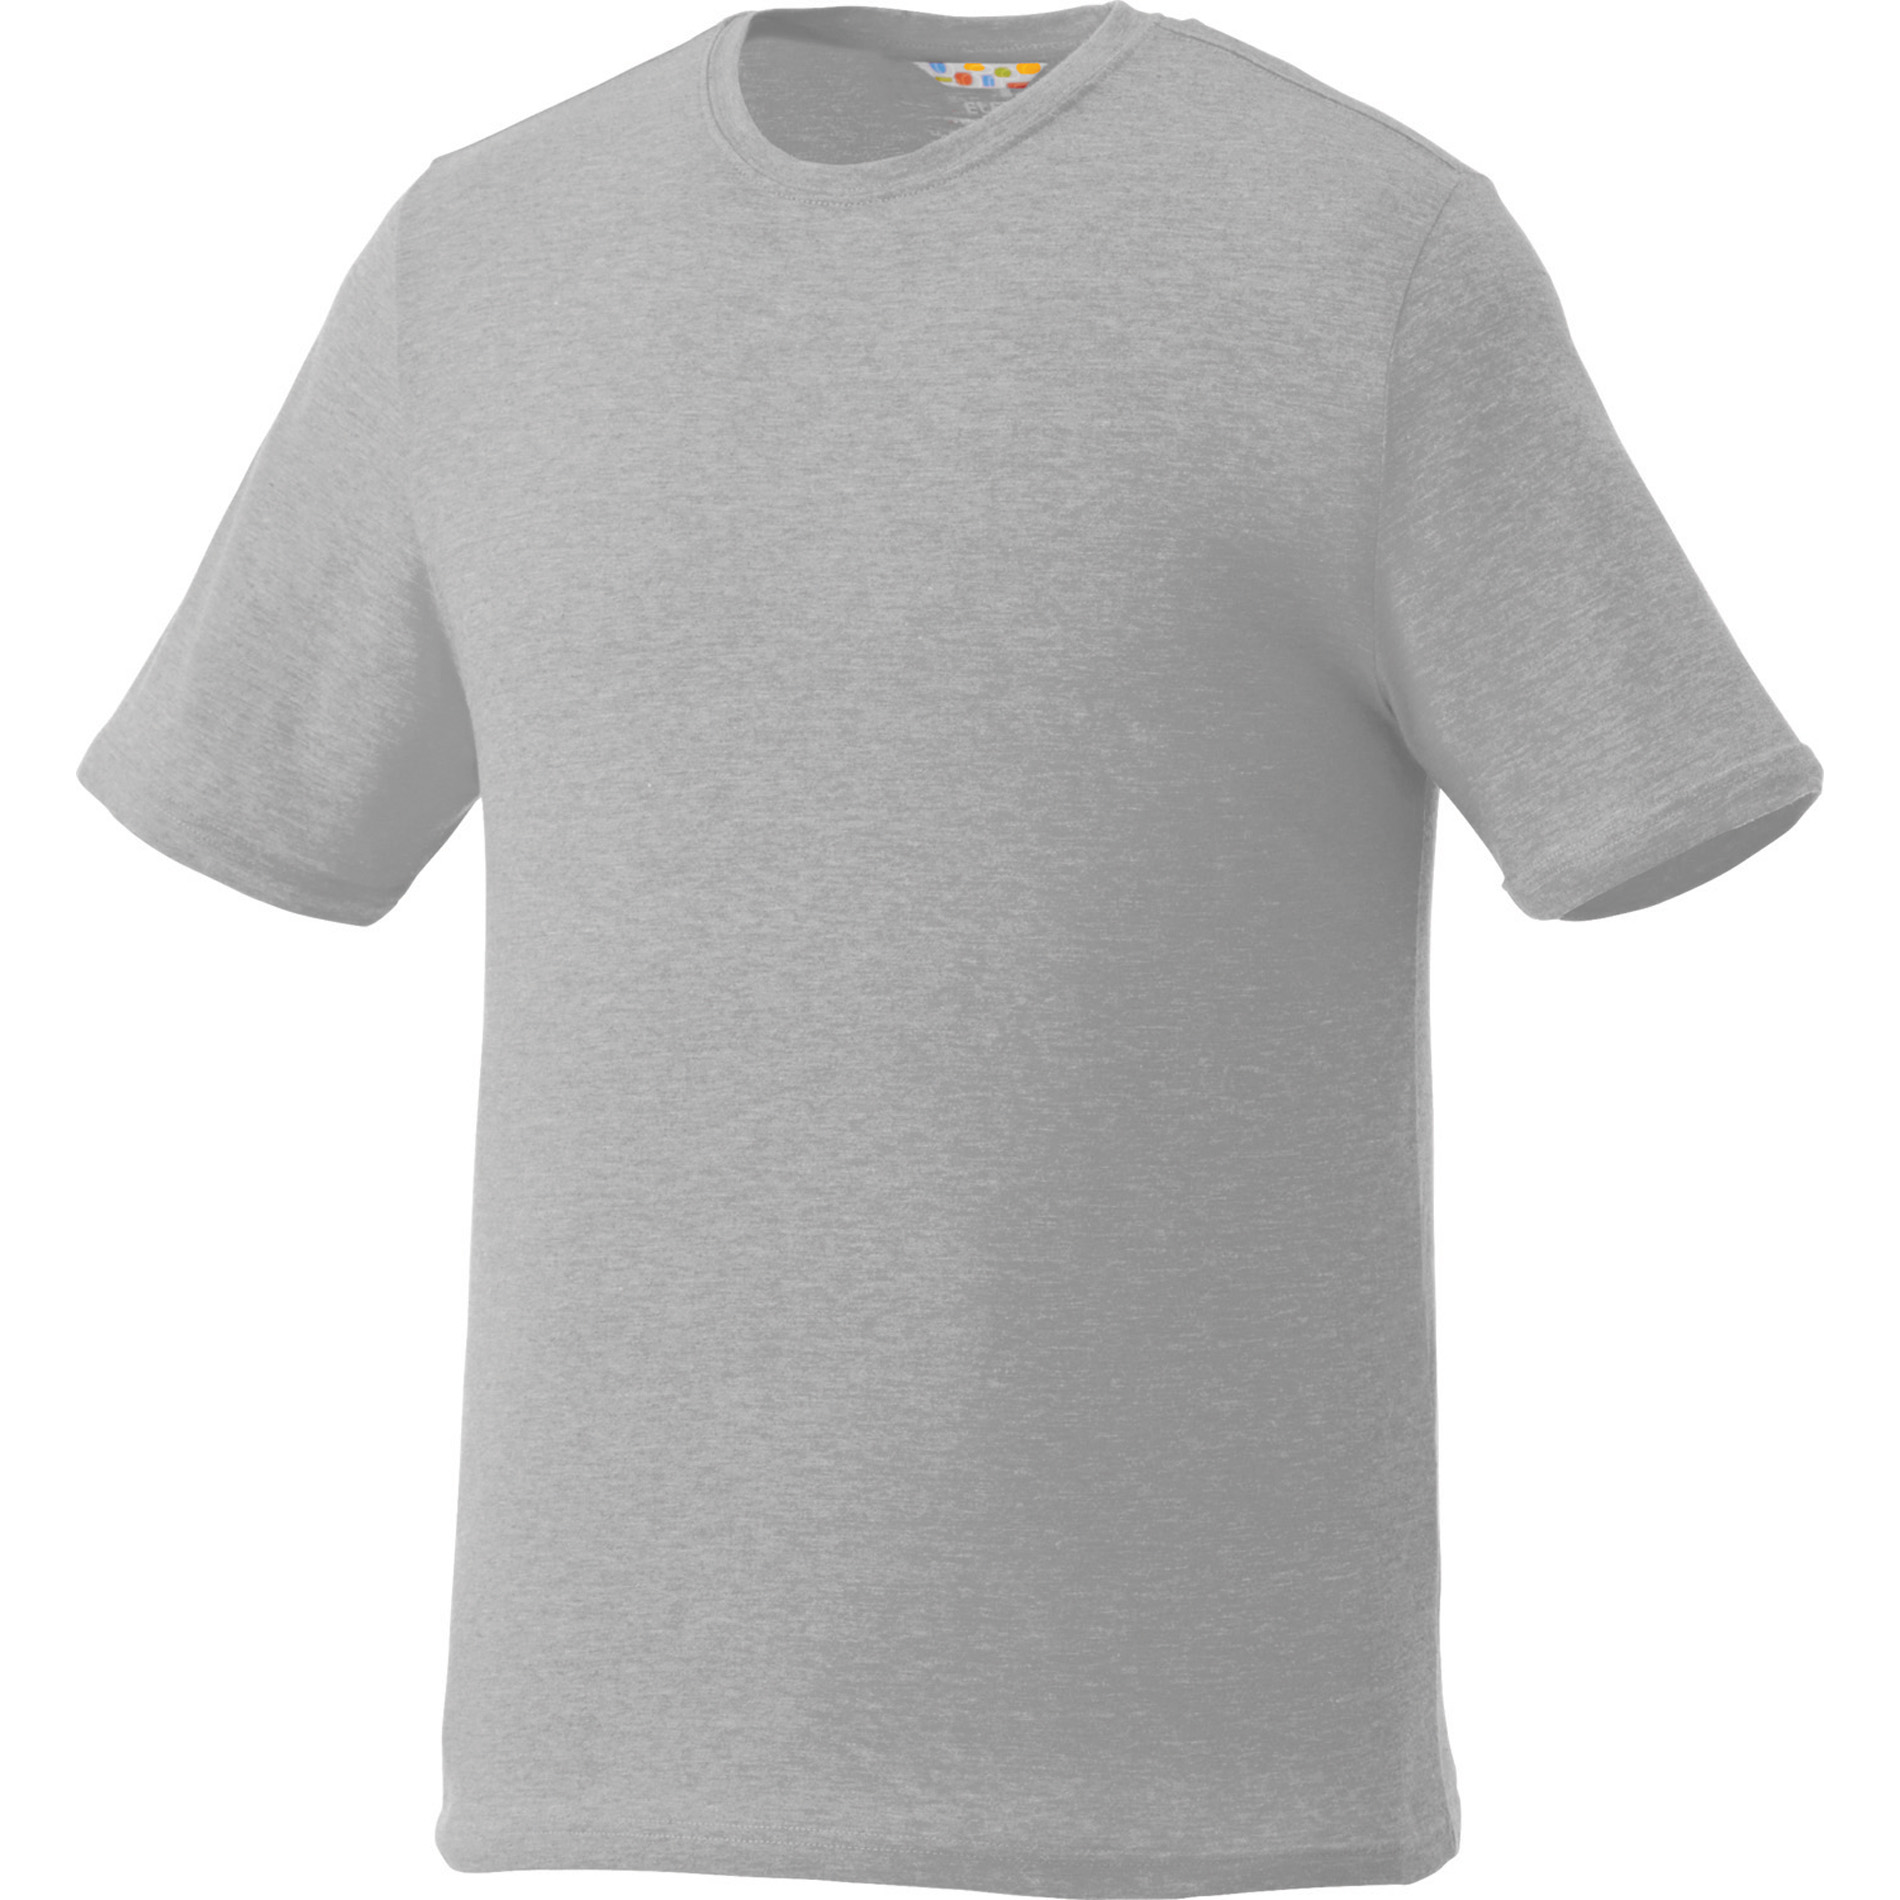 Promotional Products | T-Shirts & Knits